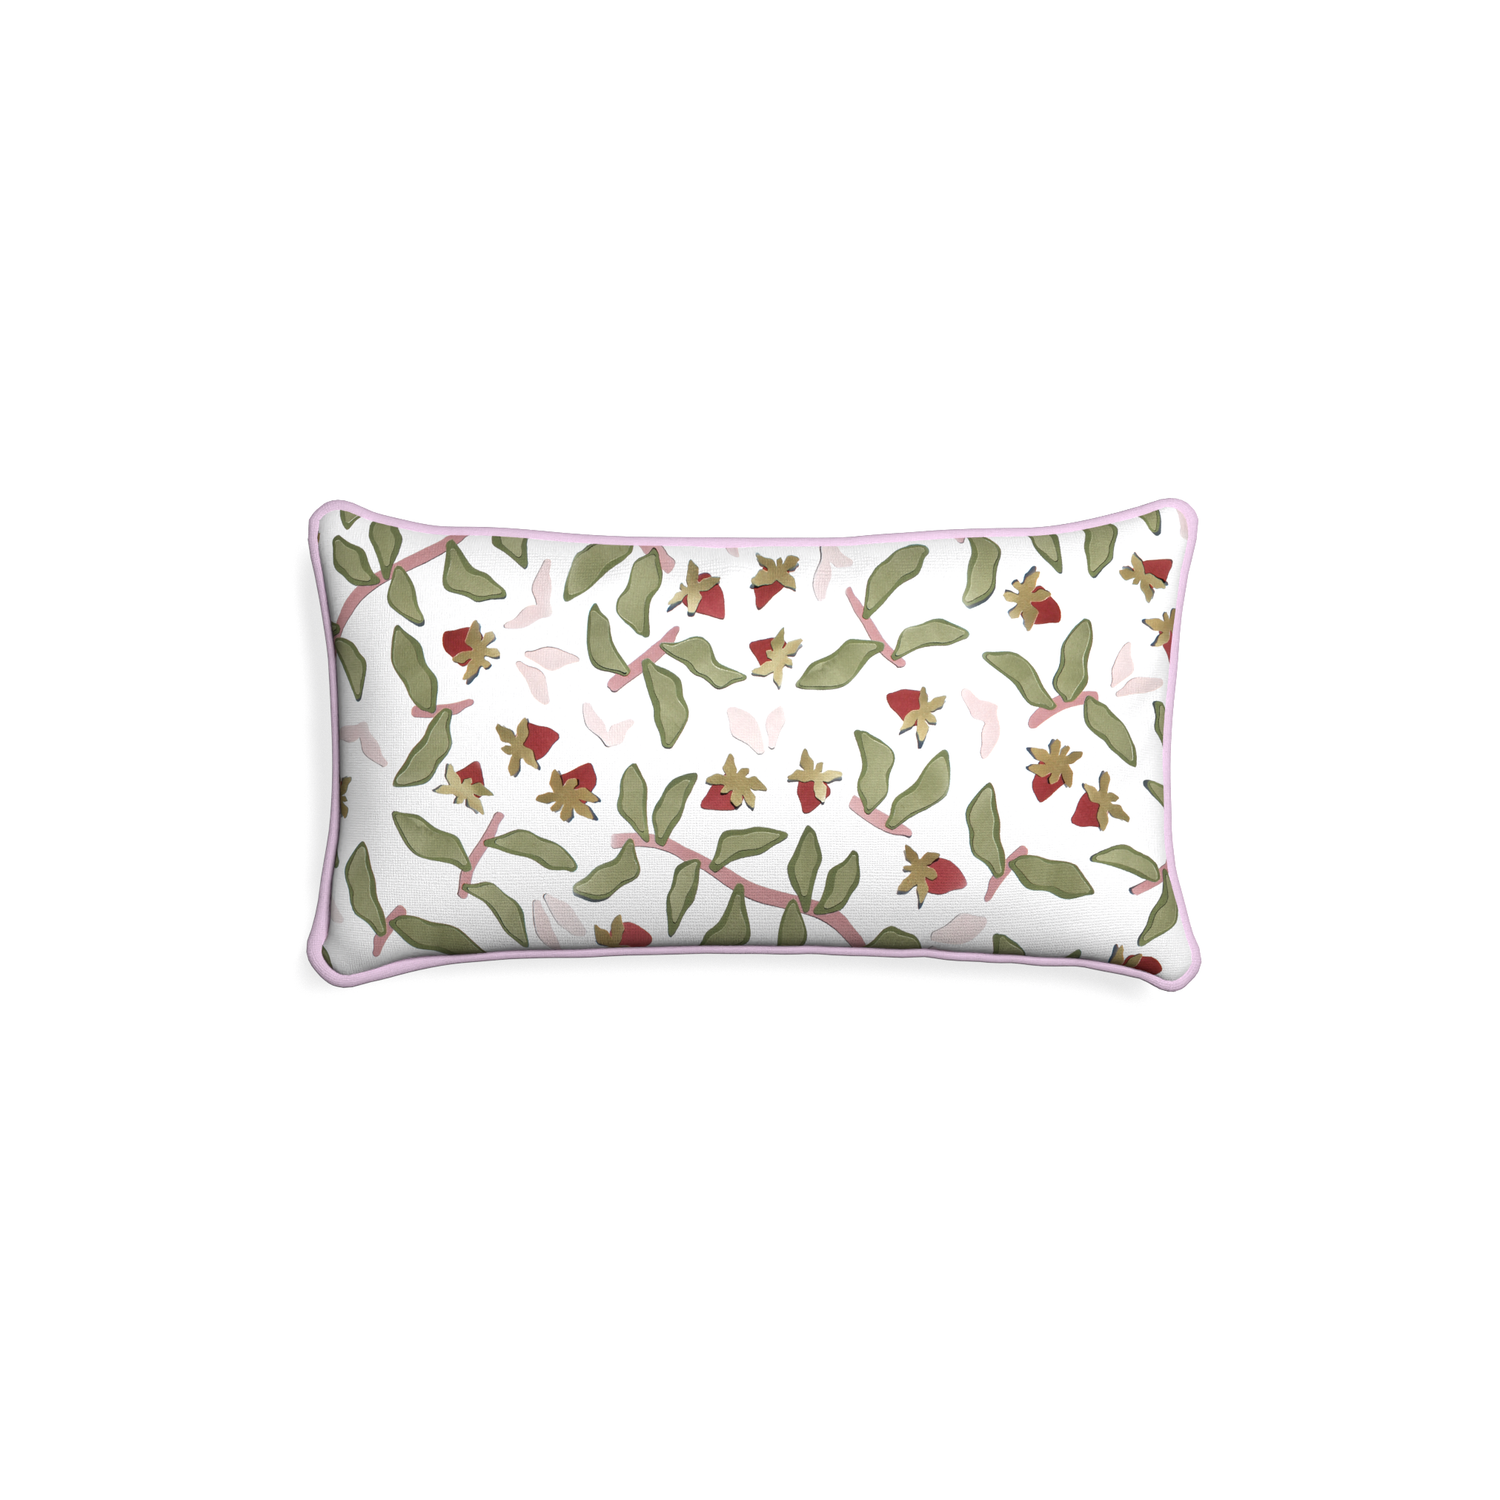 Petite-lumbar nellie custom strawberry & botanicalpillow with l piping on white background